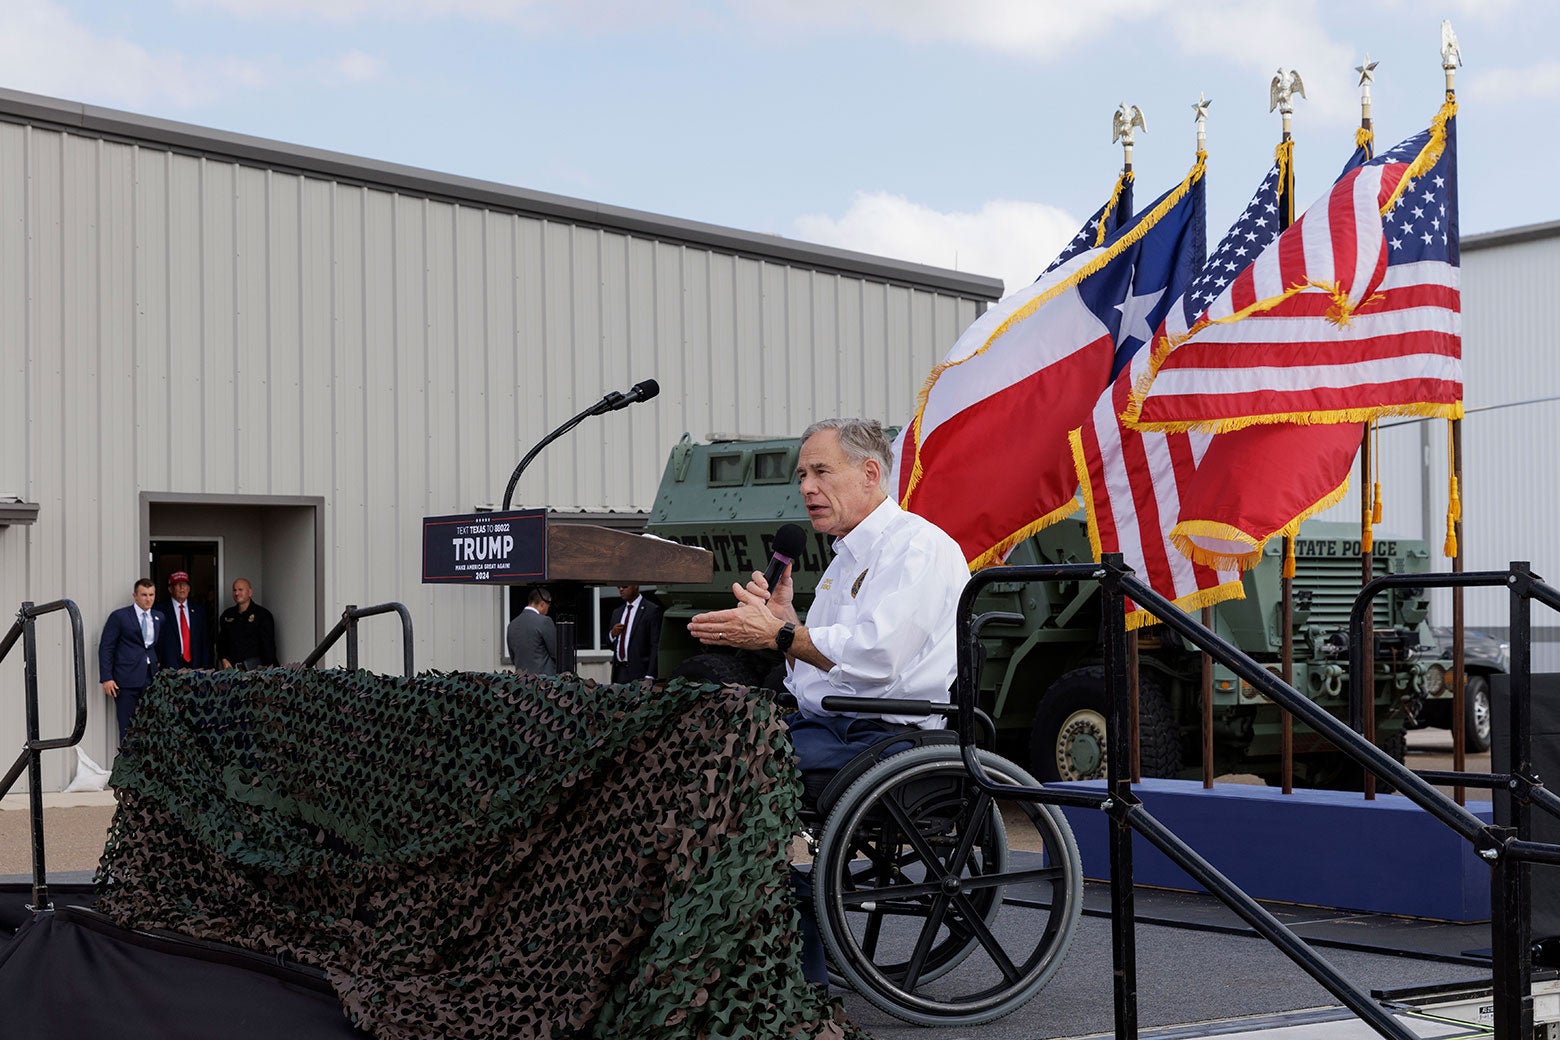 Abbott, in his wheelchair, talks to a crowd from a stage with Texas and American flags behind him.